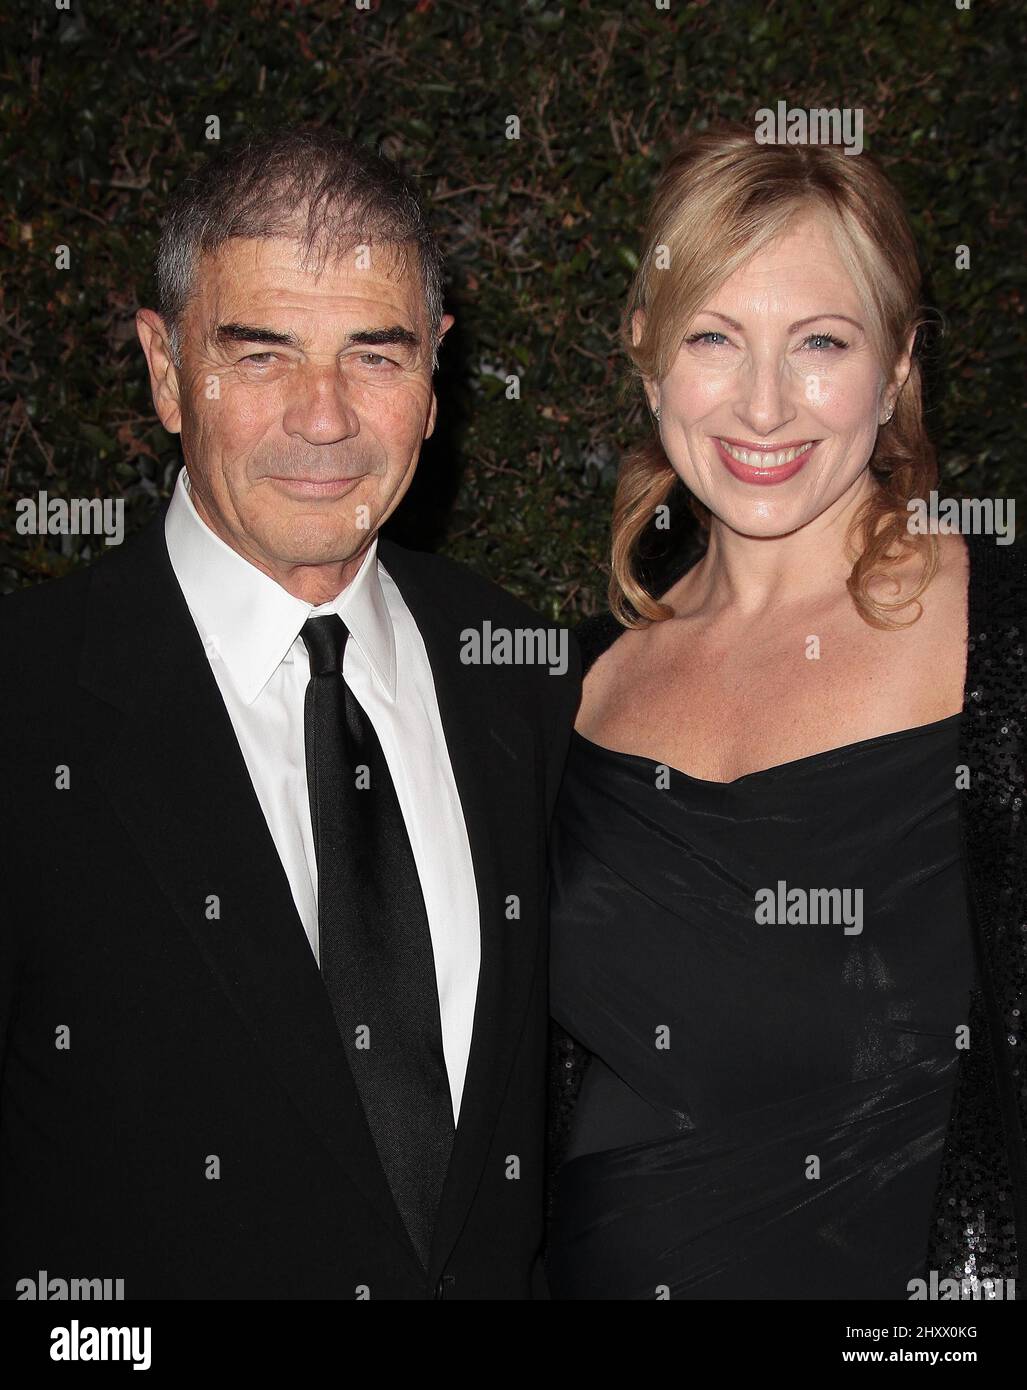 Robert Forster at the 3rd Annual Governors Ball, Los Angeles. Stock Photo